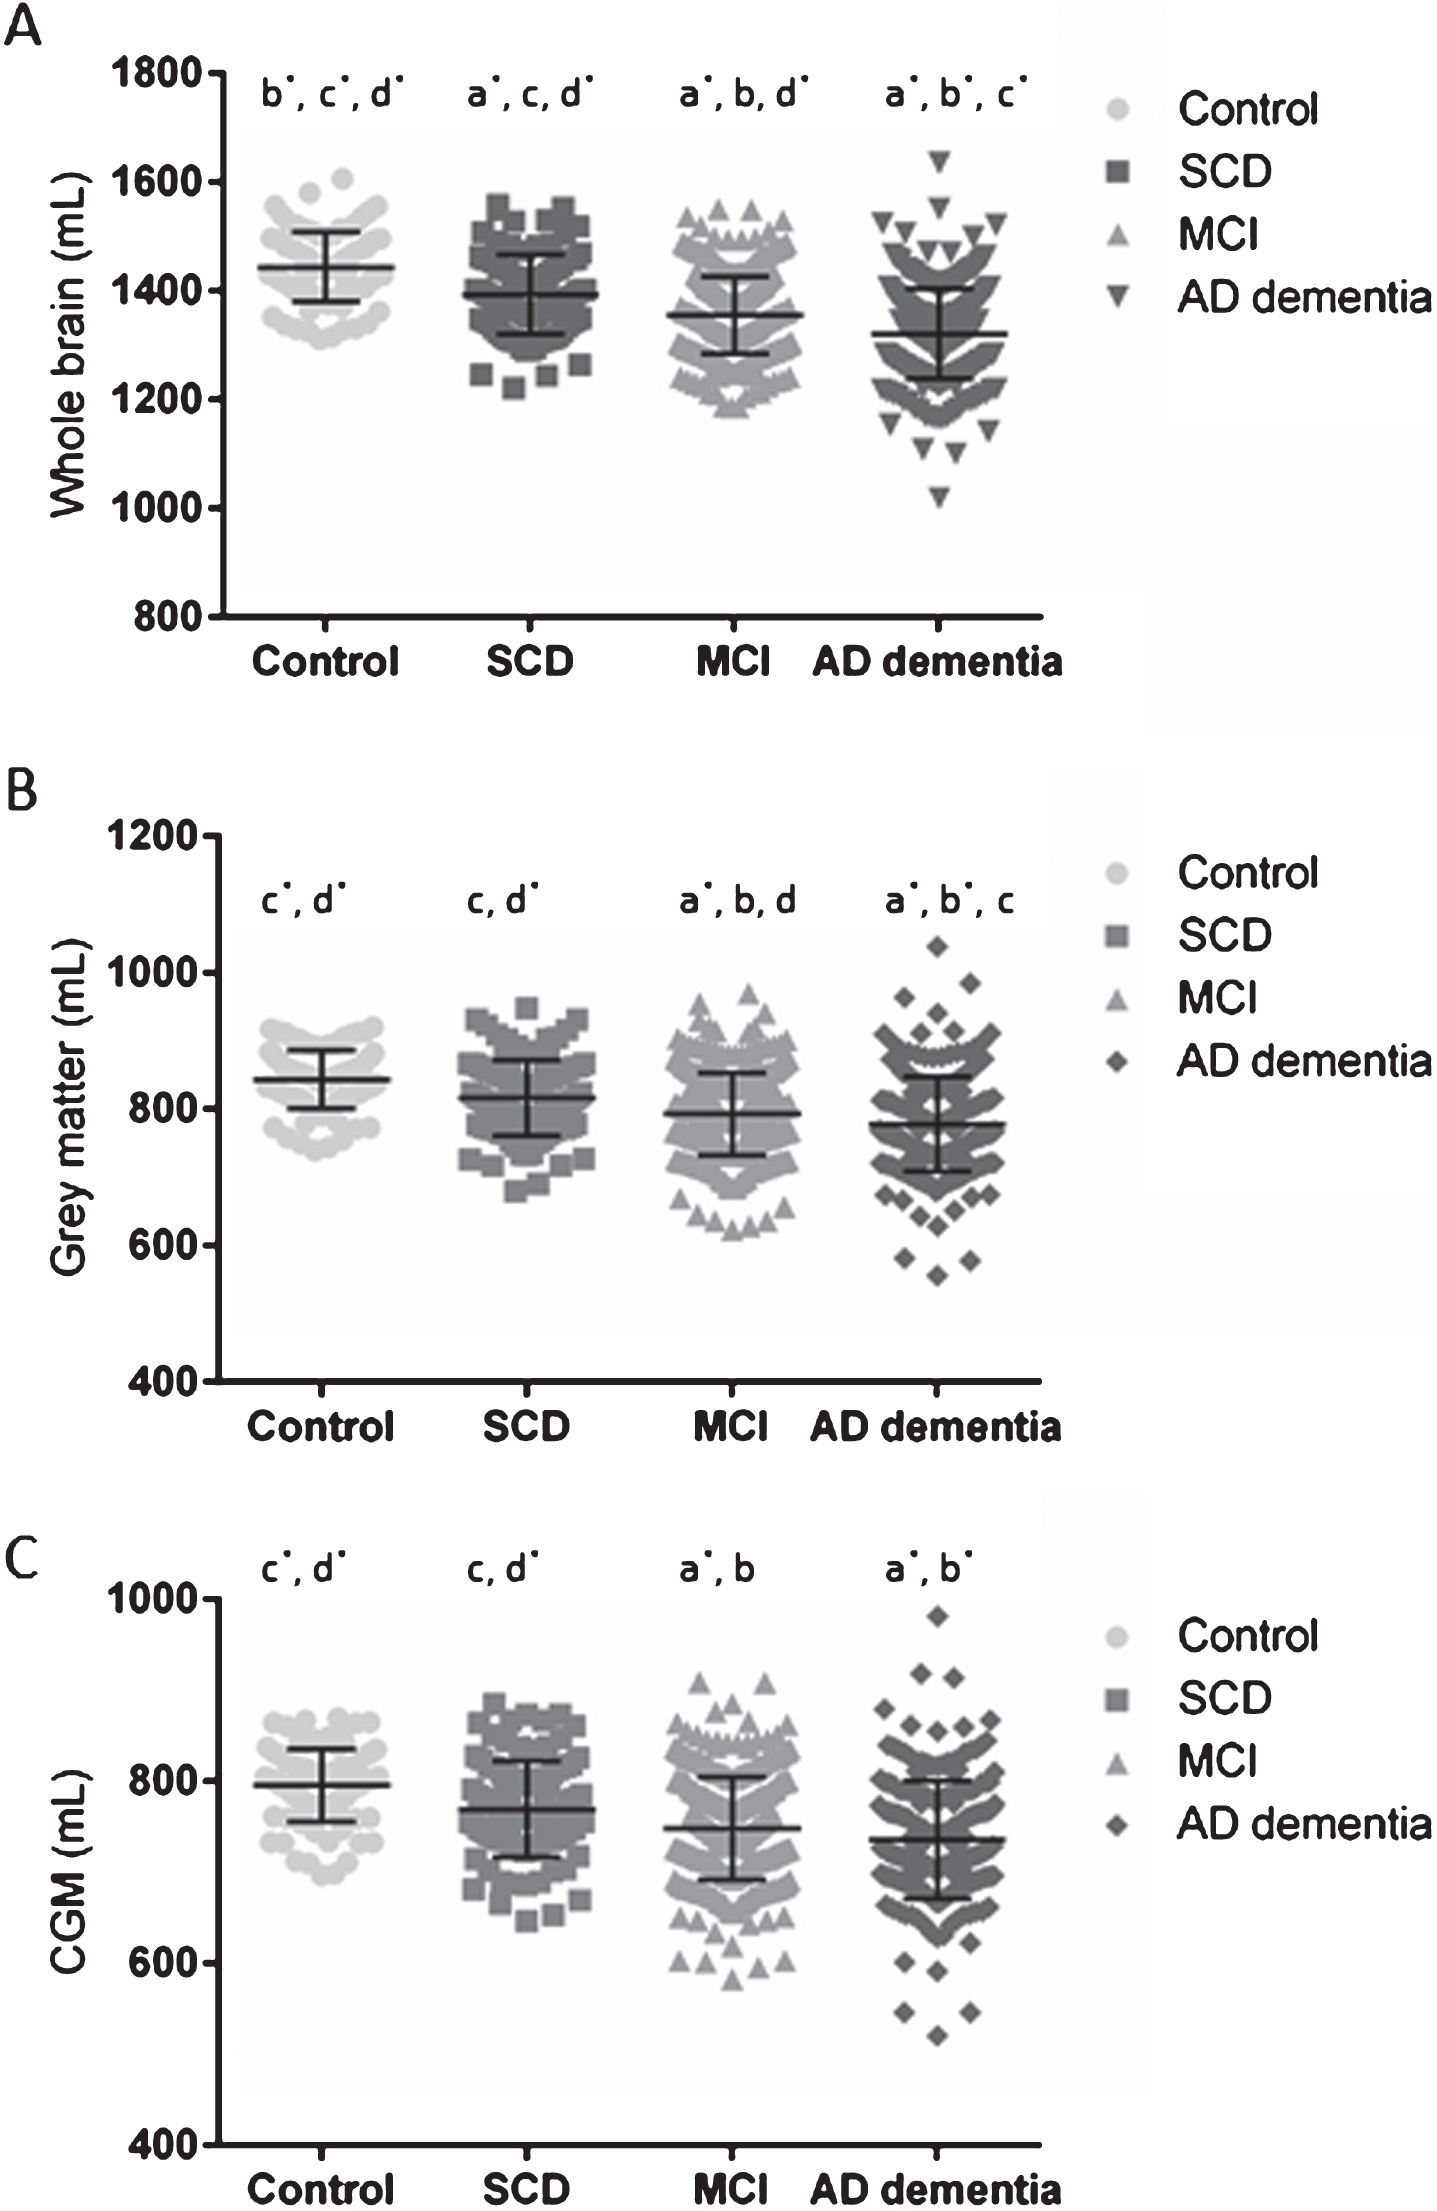 WB, GM, and CGM volumes across the different clinical diagnosis. Scatterplots of WB (A), GM (B), and CGM (C) volumes in mL per clinical diagnostic category with their corresponding mean±SD. Significant differences were reported between clinical diagnoses, p = 0.001* or p < 0.05 (a-d). Volumes were significantly different between a clinical diagnostic group and cognitively healthy controls (a), to SCD (b), to MCI (c), or to AD dementia patients (d). WB was significantly different between all diagnostic groups. GM was significantly different between all diagnostic groups, except between controls and SCD. The CGM was significantly different between controls and SCD versus MCI and AD dementia. AD, Alzheimer’s disease; CGM, cortical grey matter; GM, grey matter; MCI, mild cognitive impairment; SCD, subjective cognitive decline; SD, standard deviation; WB, whole brain.